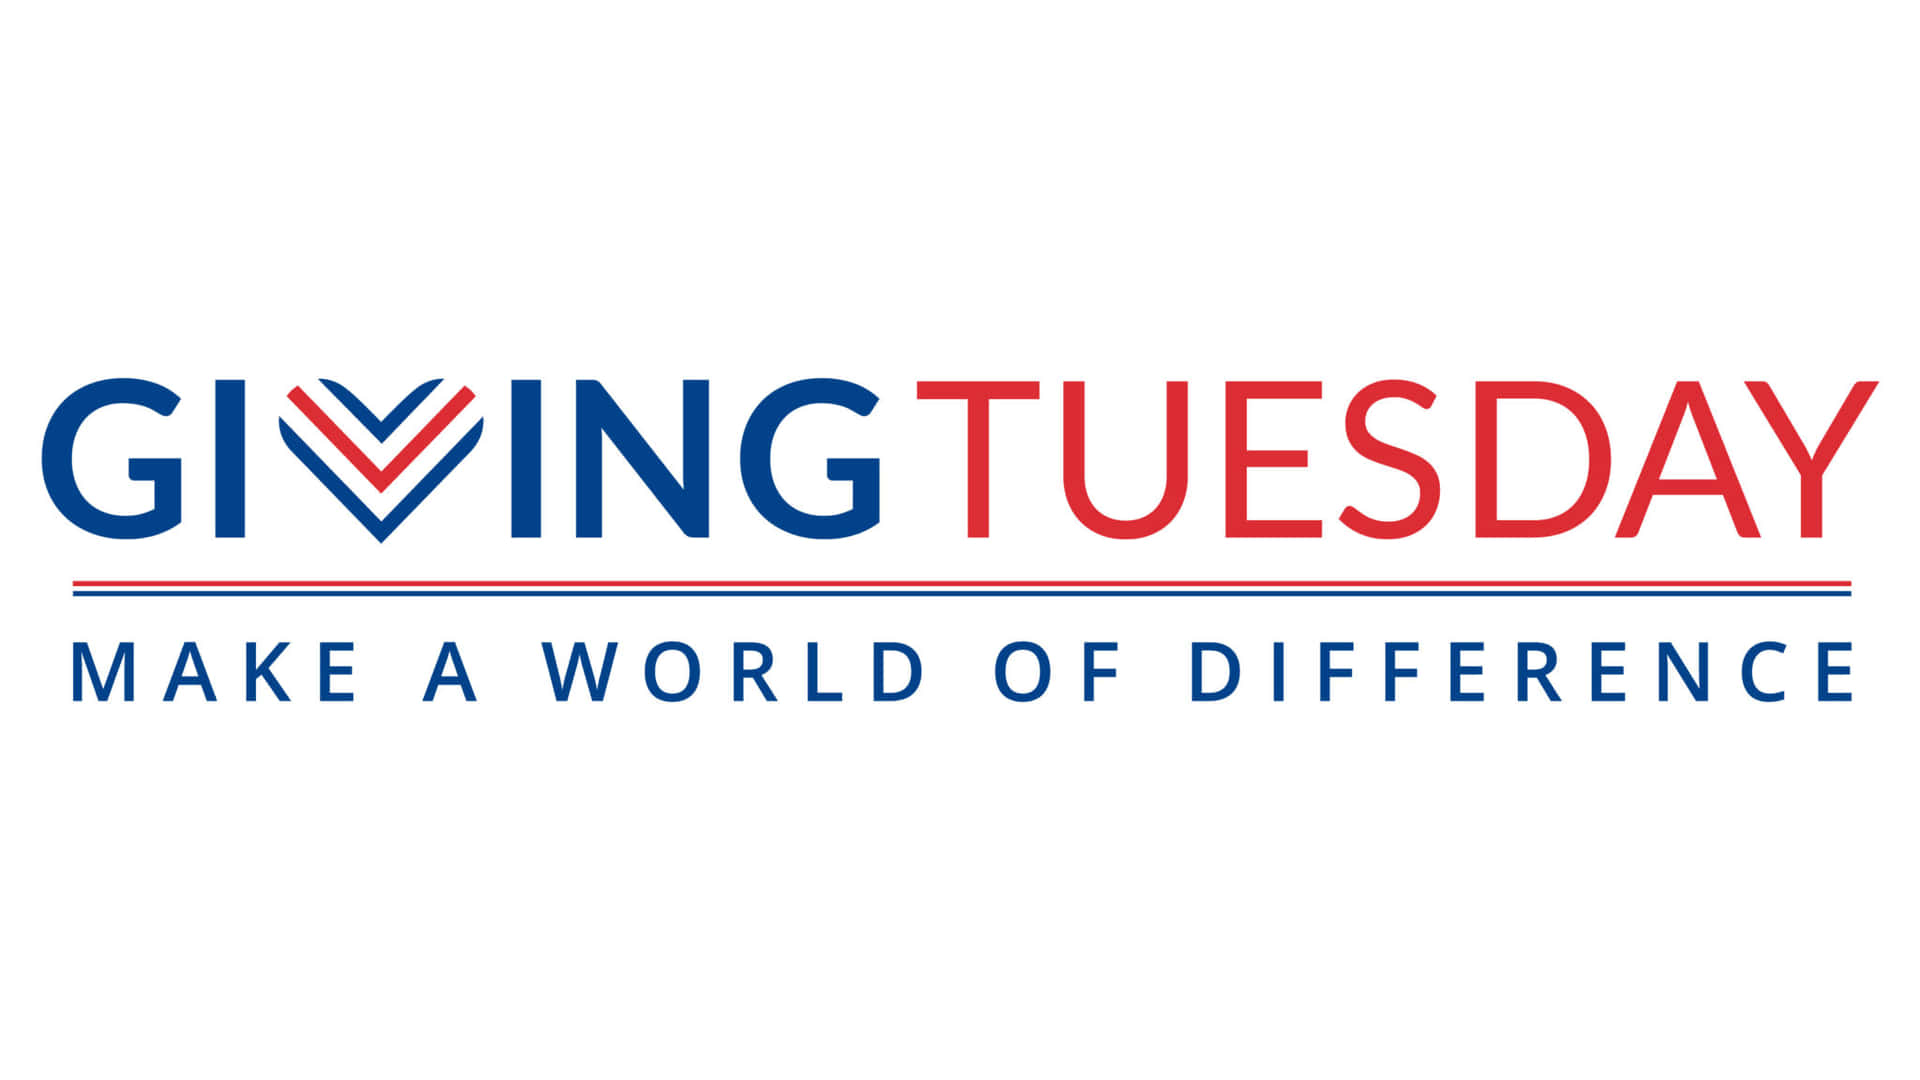 Download Commemoration Of Giving Tuesday With Heartshaped Hands